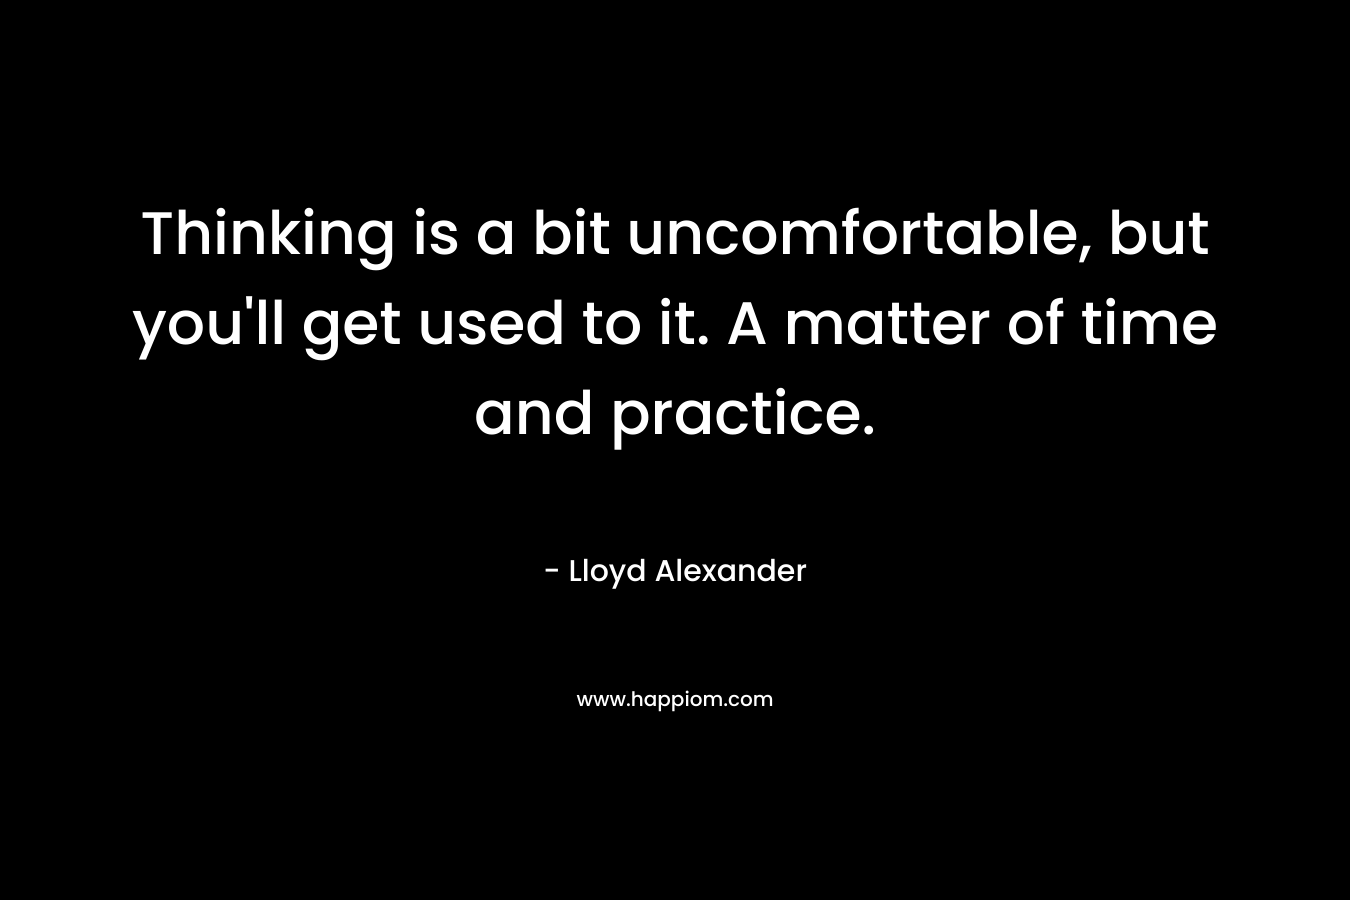 Thinking is a bit uncomfortable, but you'll get used to it. A matter of time and practice.